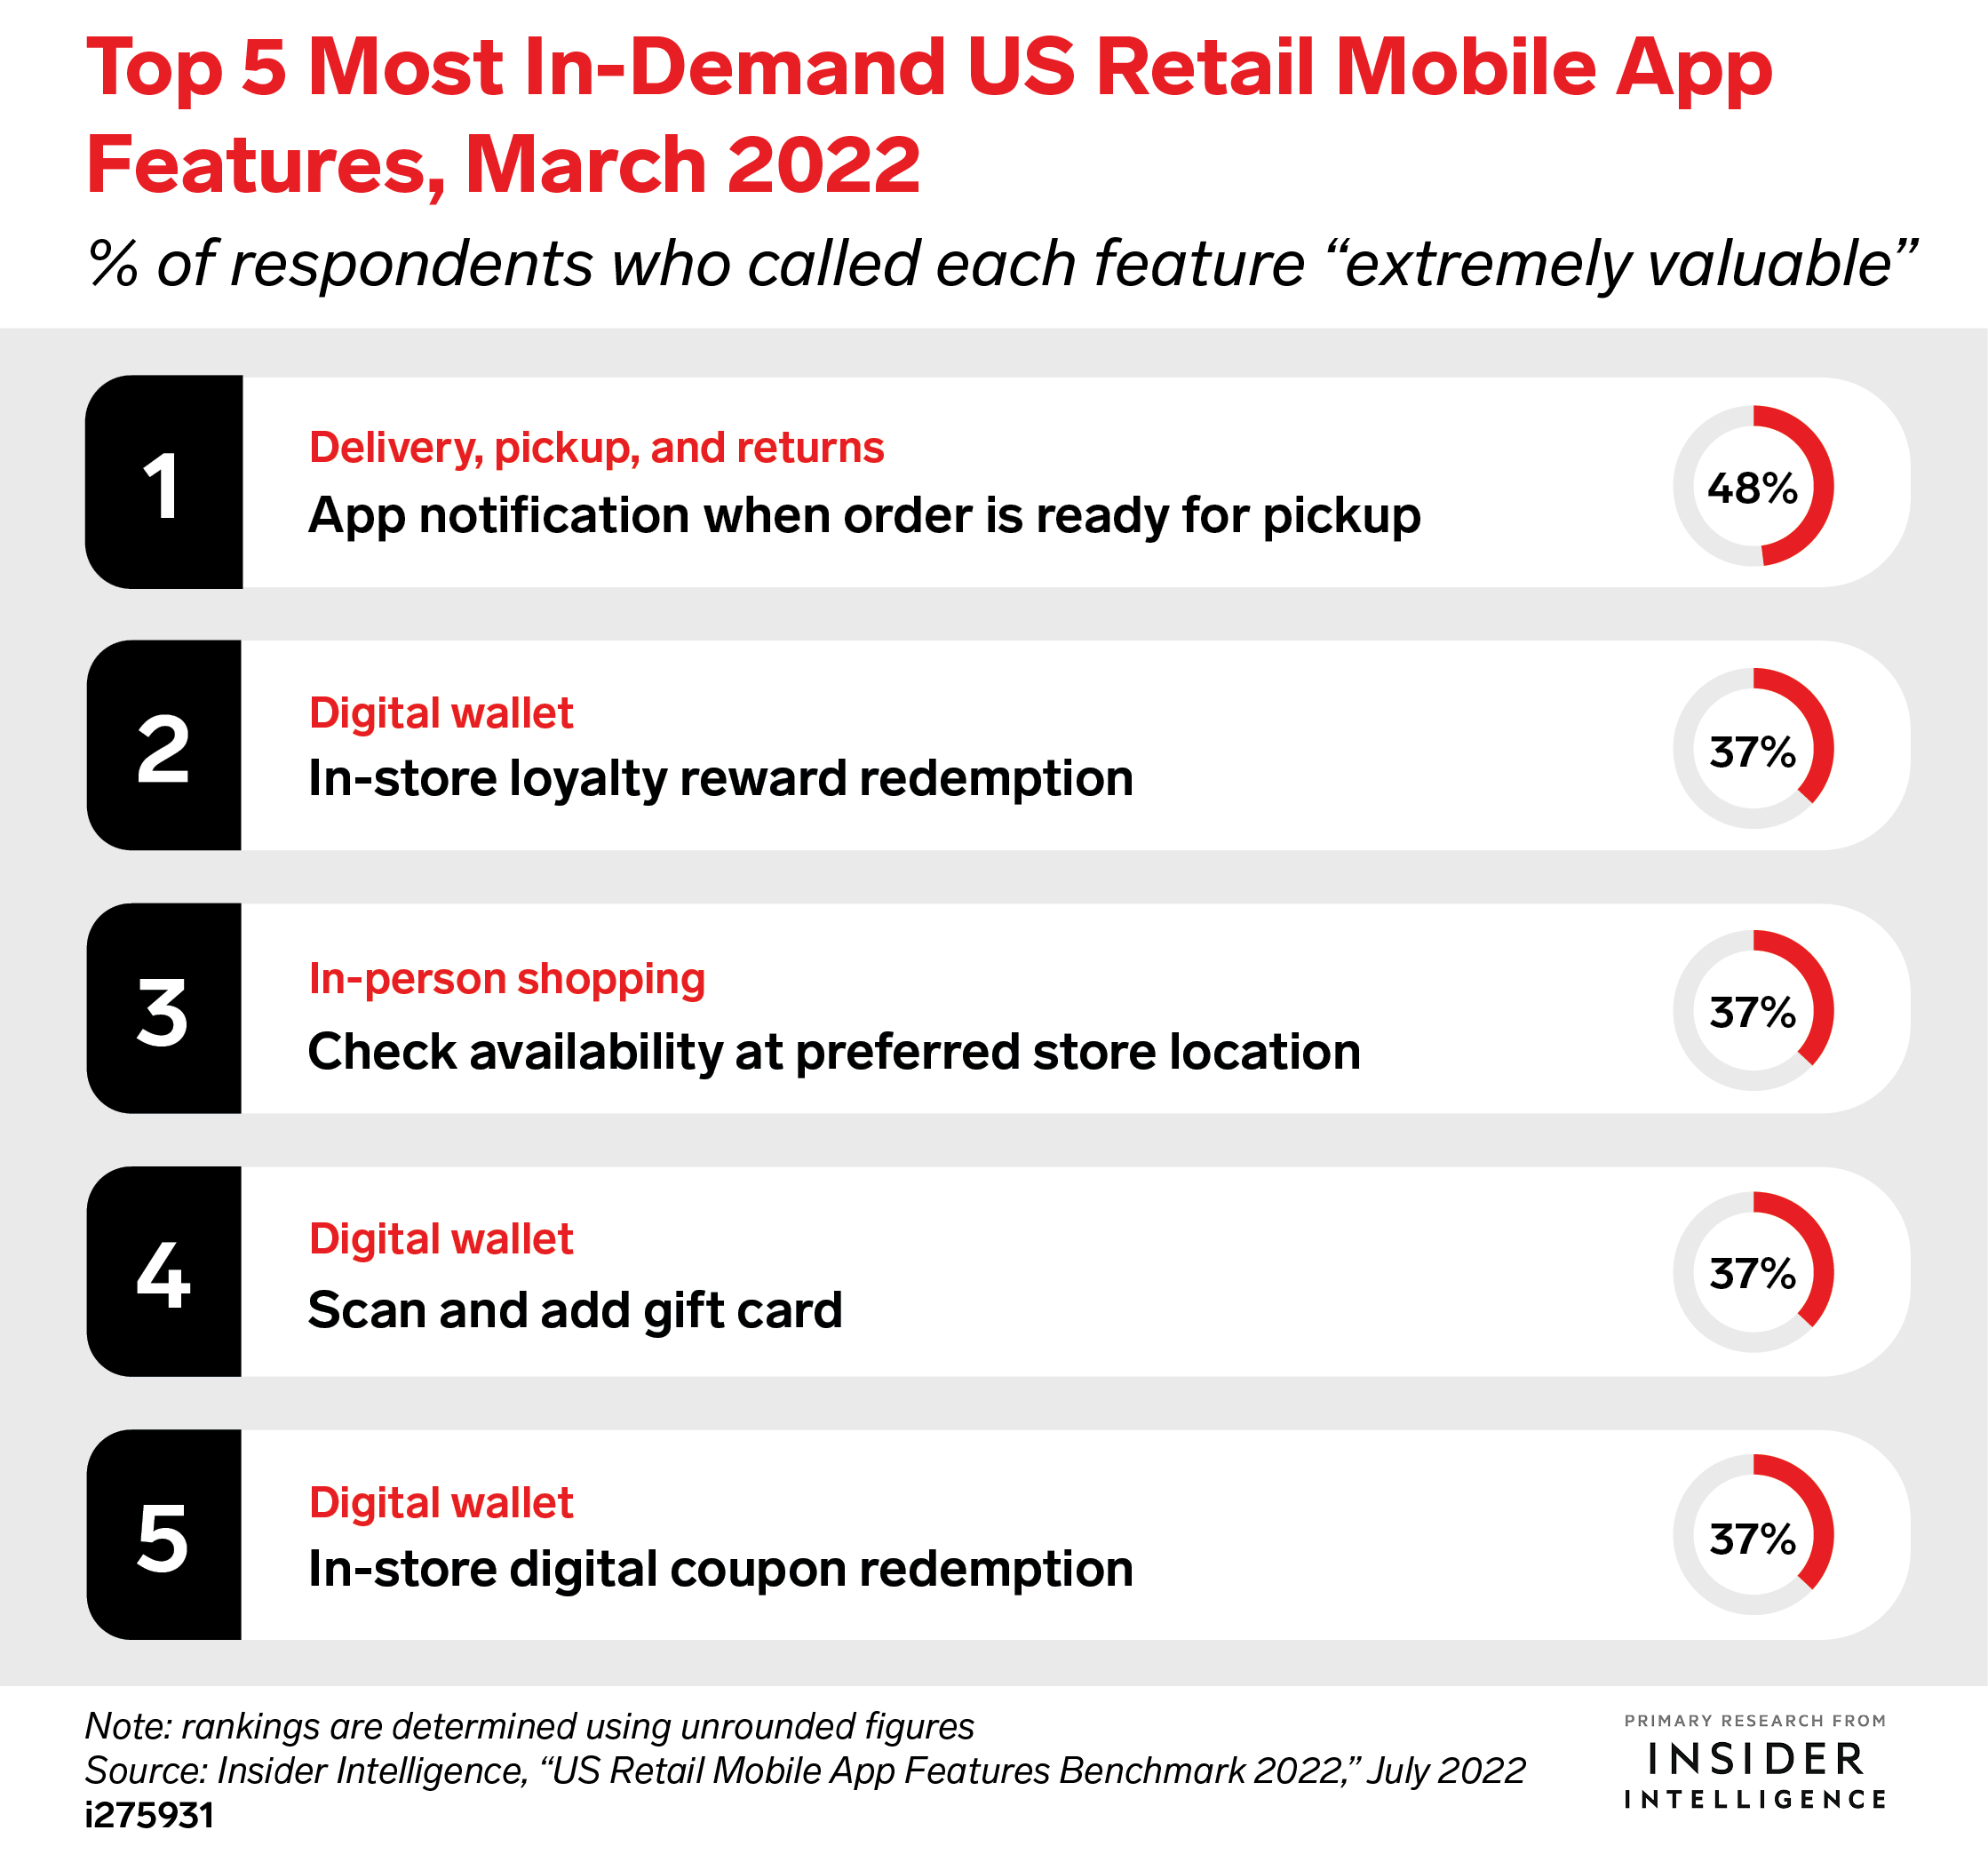 Top 5 Most In-Demand US Retail Mobile App Features, March 2022 (% of respondents who called each feature 